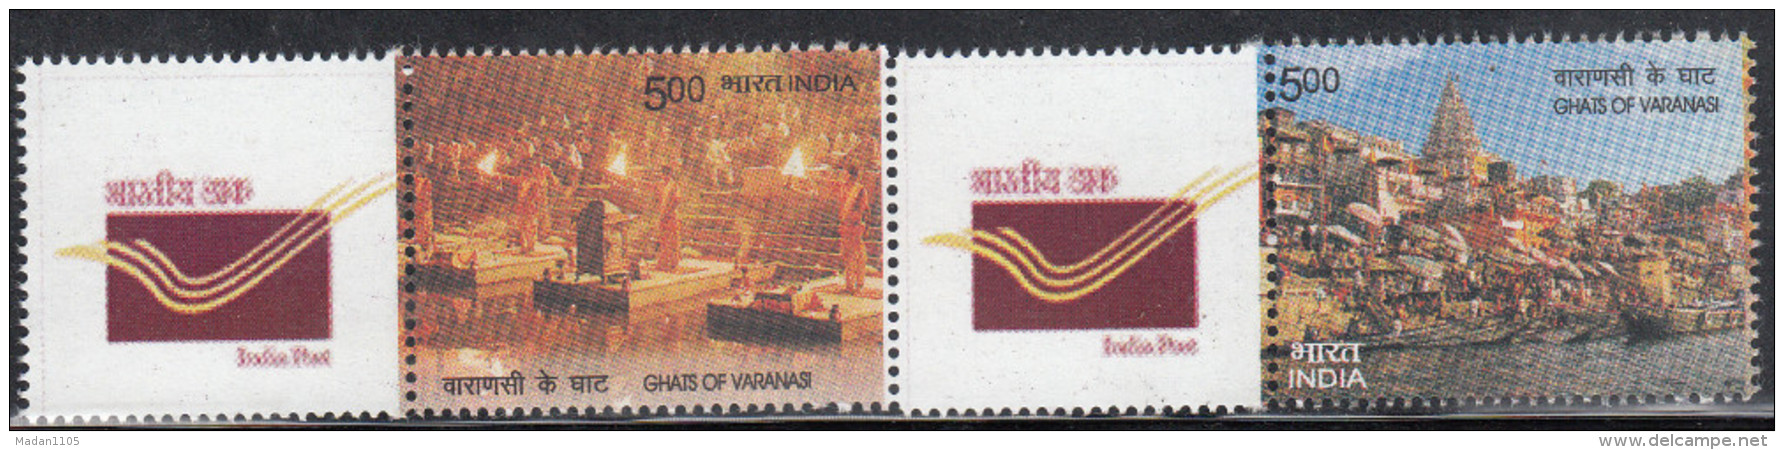 INDIA 2016 MY STAMP, VARANASI GHATS,Set 2v Setenant,Most Revered Hinduism Site Night & Day, Limited Issue, MNH(**) - Induismo